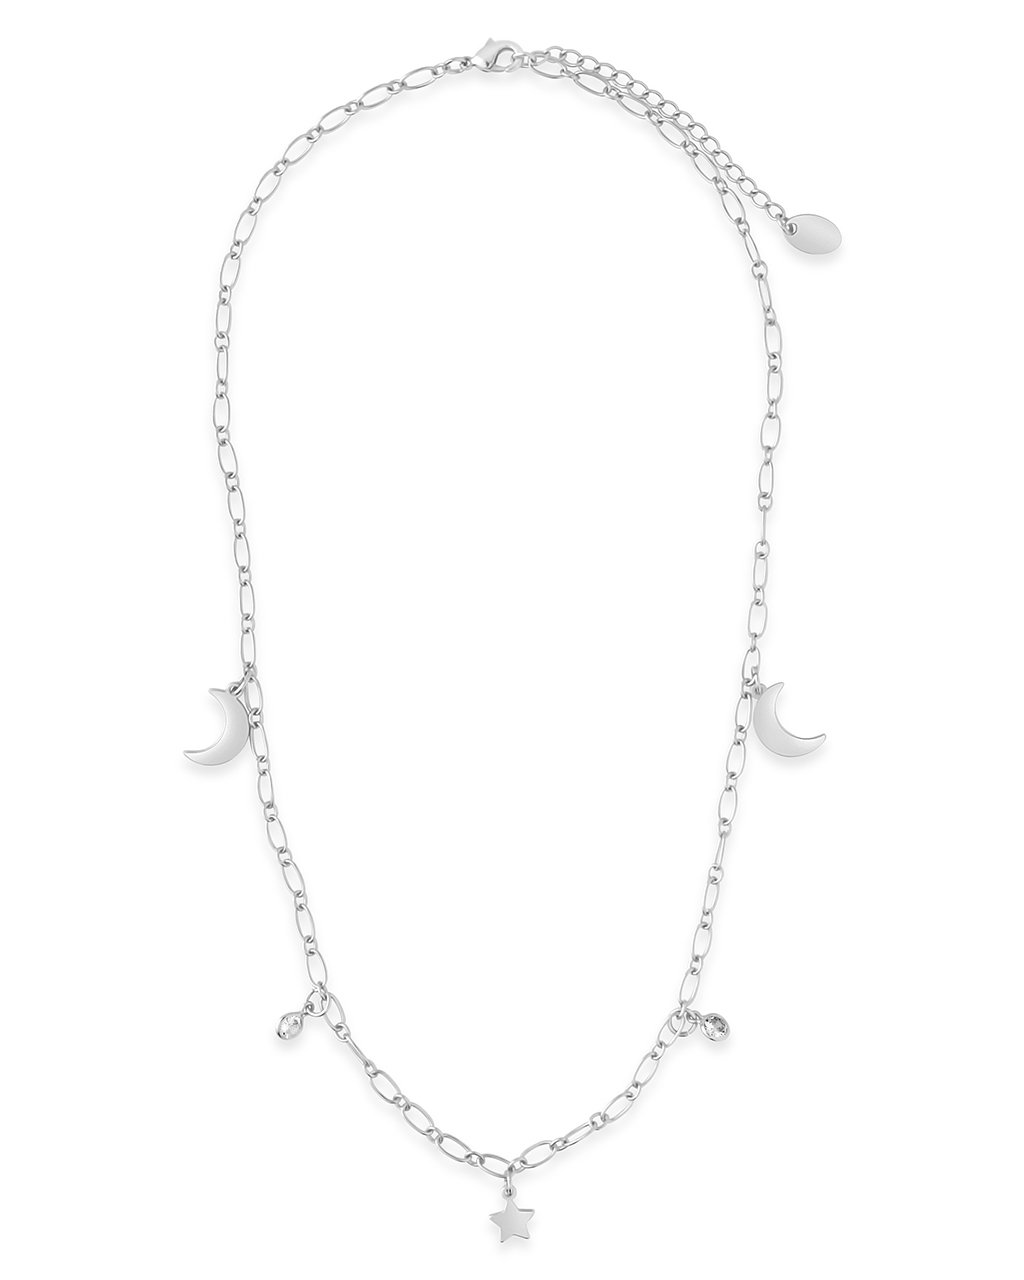 Sparkling CZ, Star, & Moon Chain Necklace - Sterling Forever